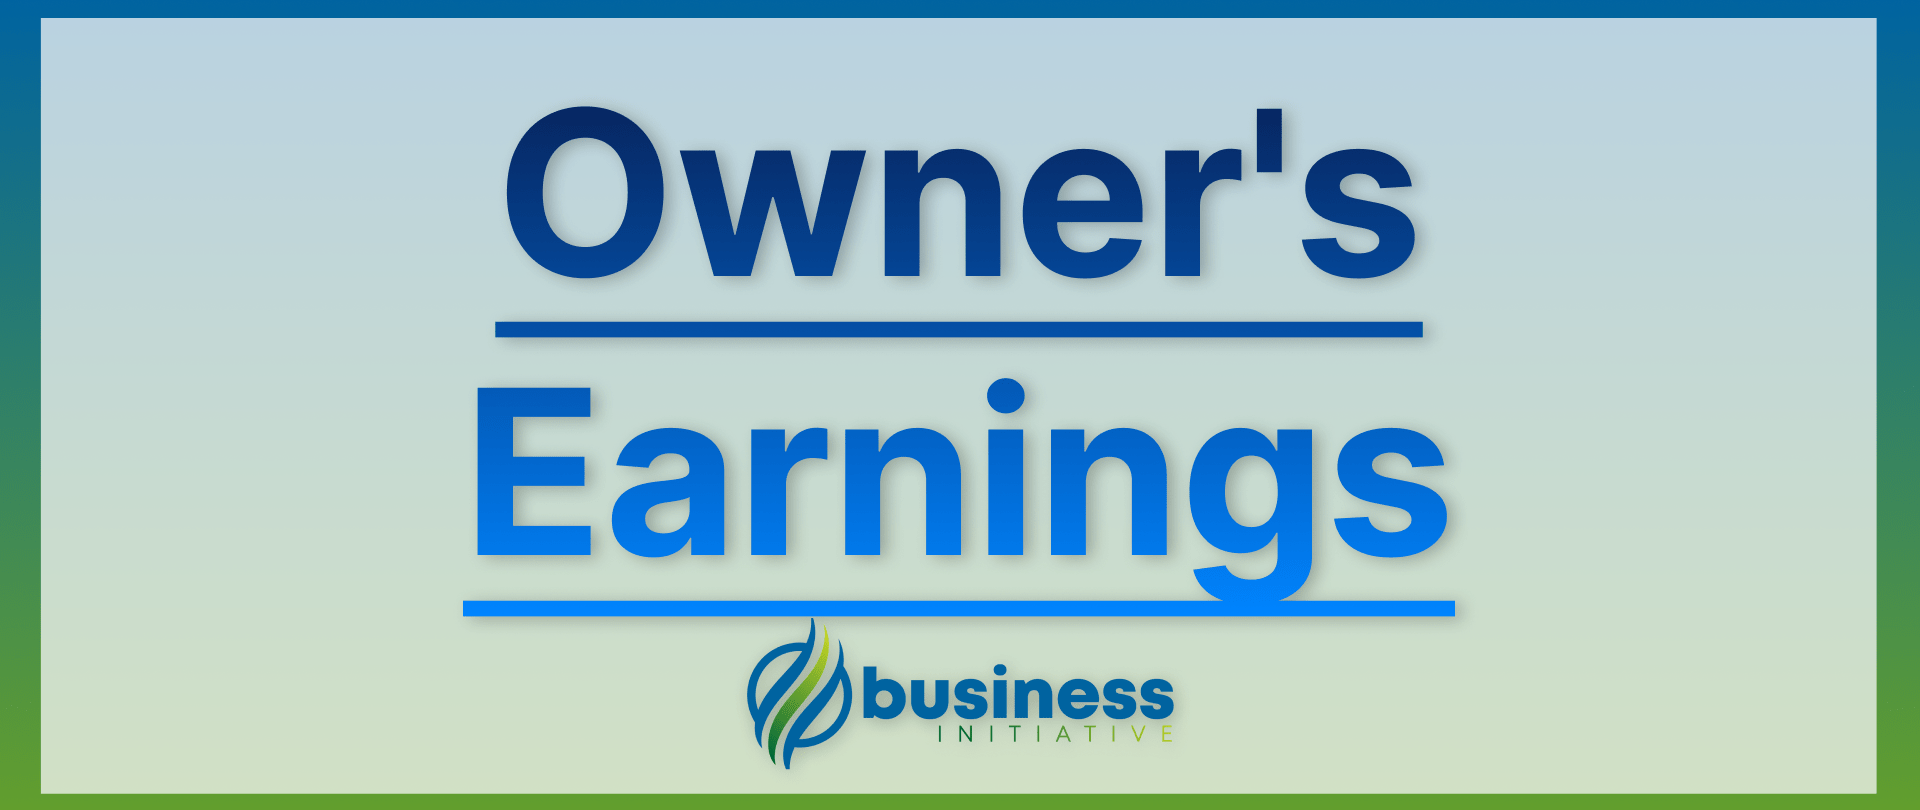 why is owners earnings so important